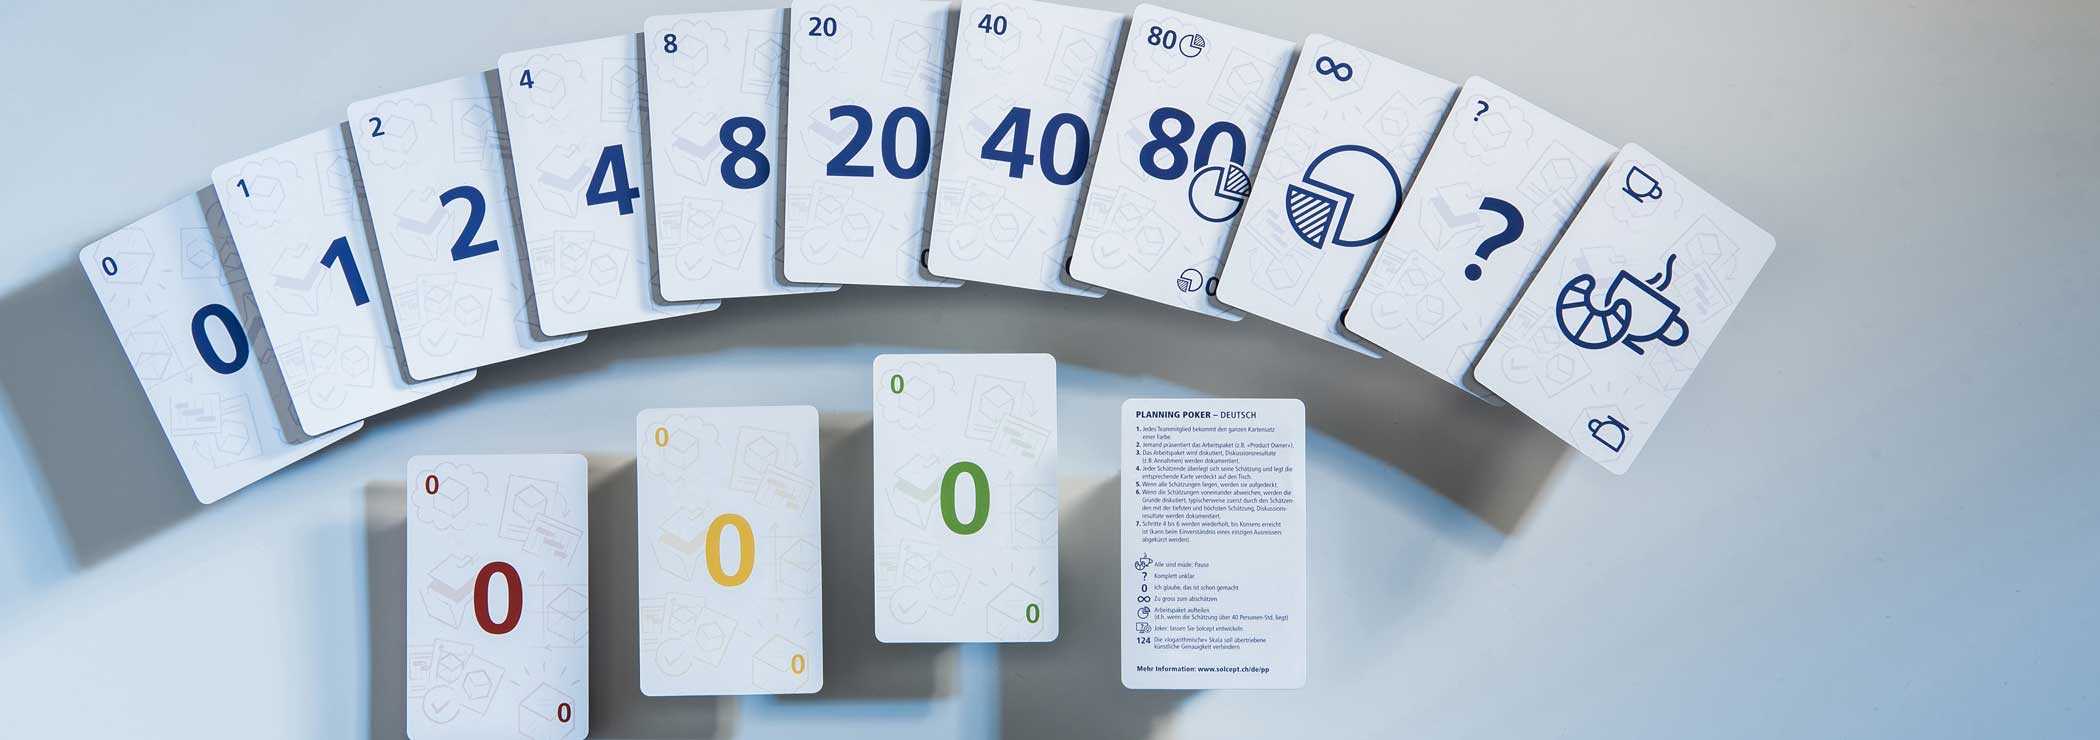 Instructions For Planning Poker In Planning Poker Cards Template